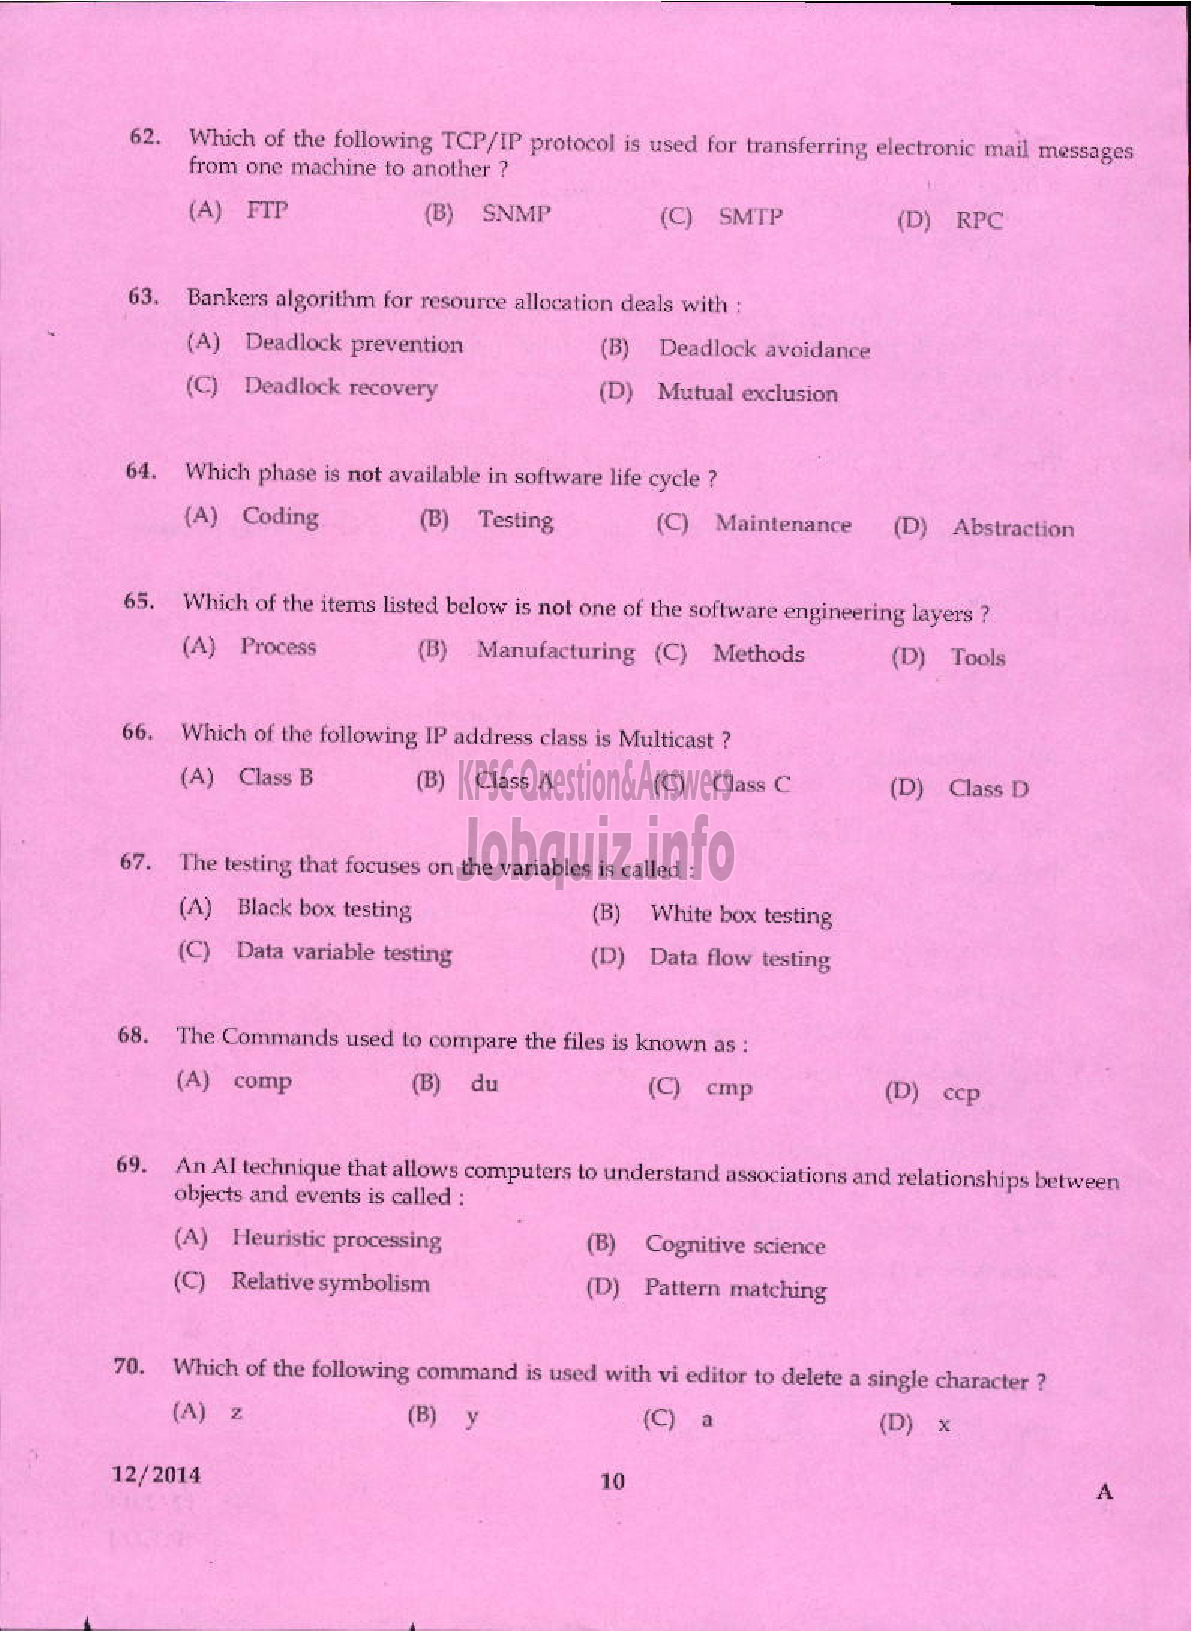 Kerala PSC Question Paper - VOCATIONAL INSTRUCTOR IN COMPUTER APPLICATION VHSE-8